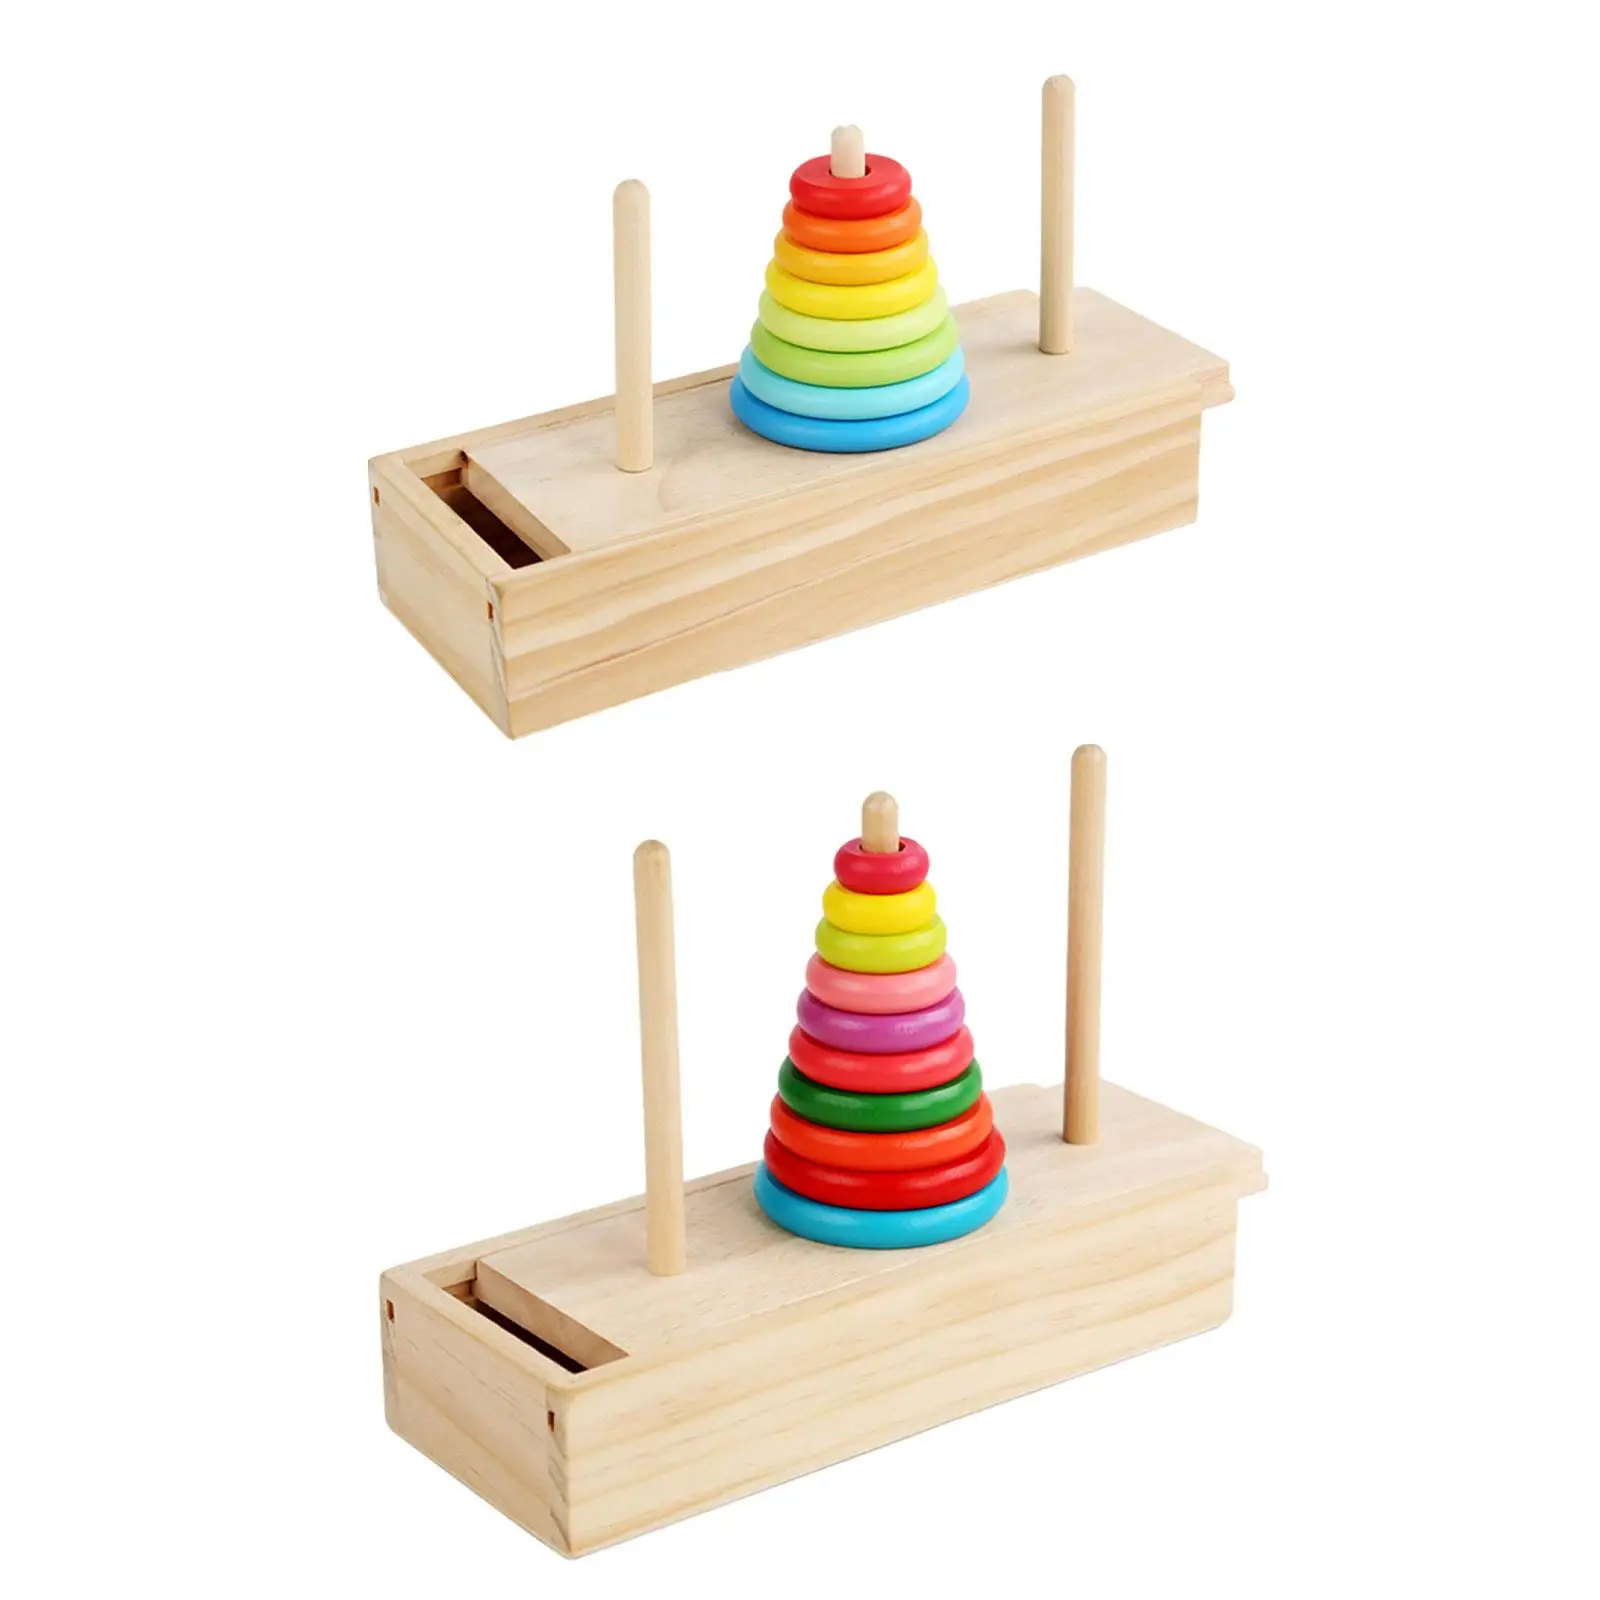 Wood Stacking Tower Practical Smooth Hand Eye Coordination Clearance Toys Stacking Rings Toys for 3 Year Old and up Baby Kids